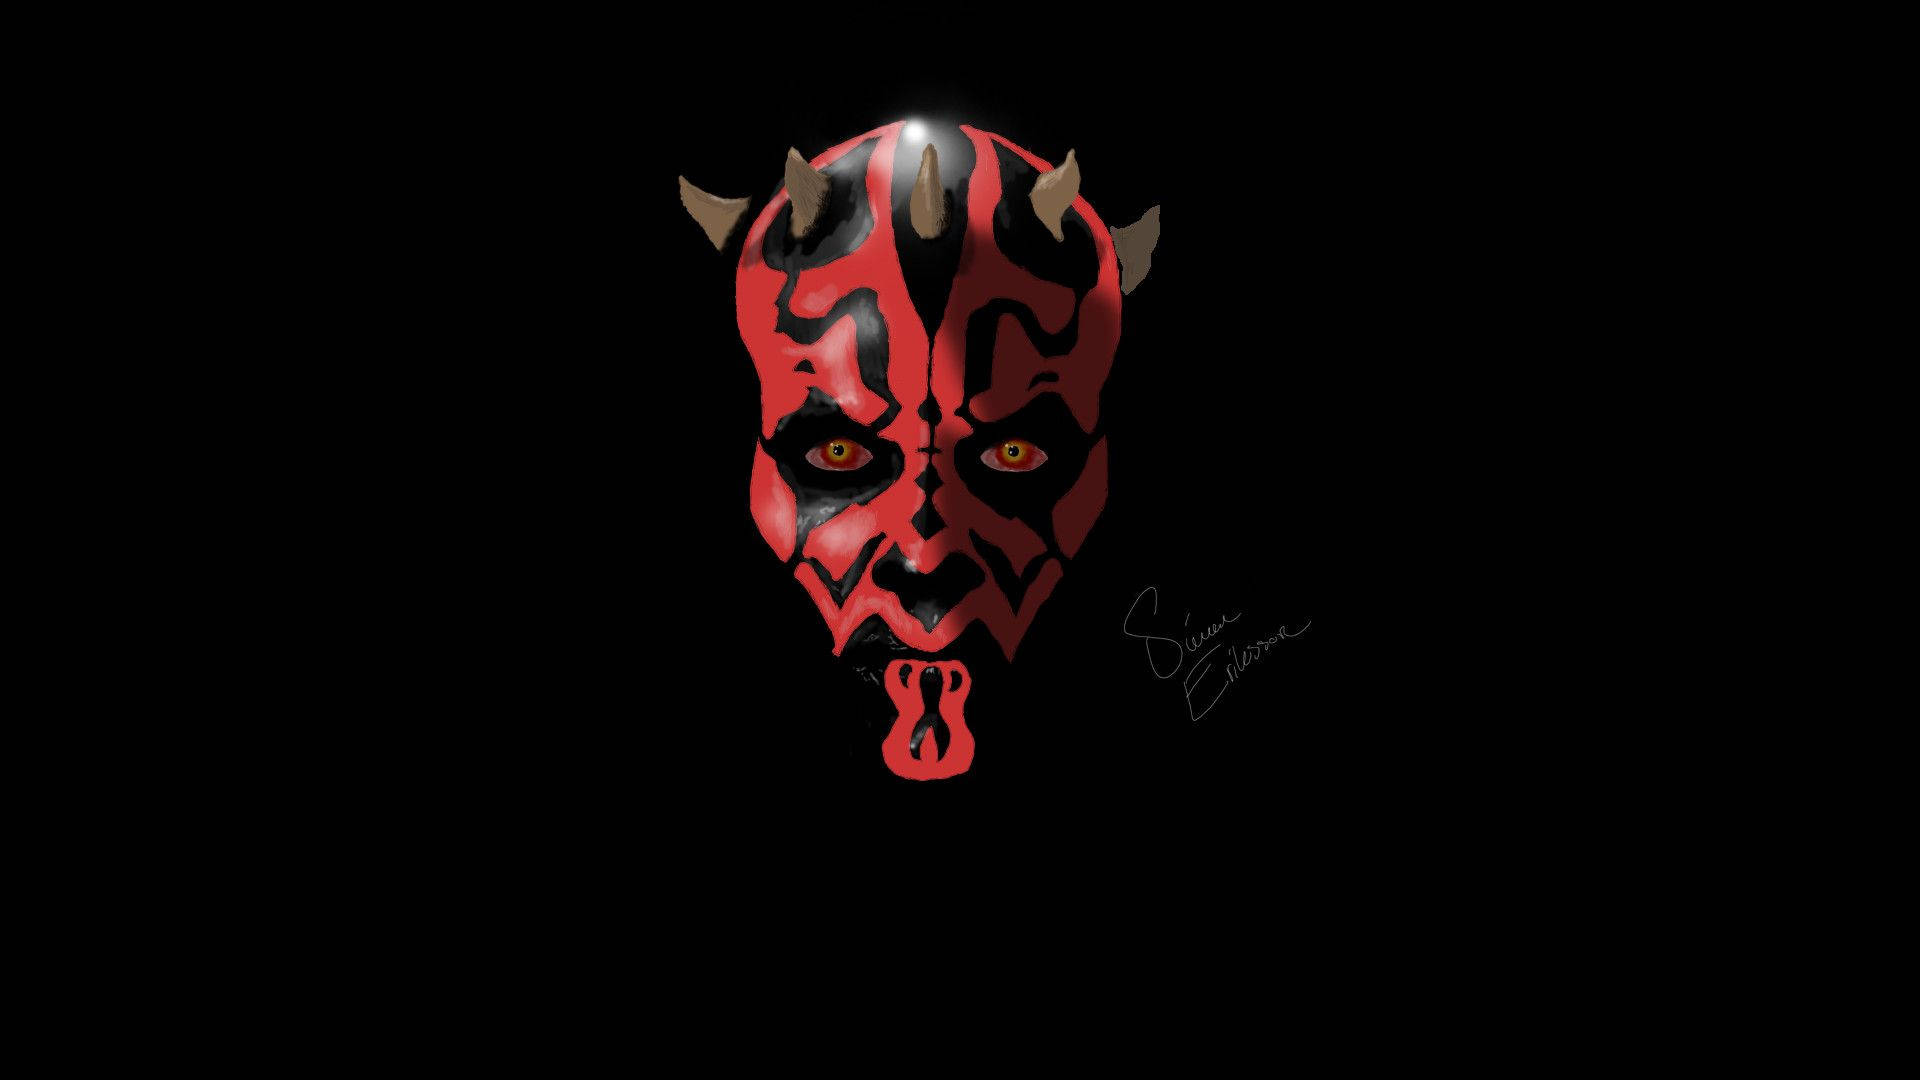 Embrace the dark side with Darth Maul Wallpaper